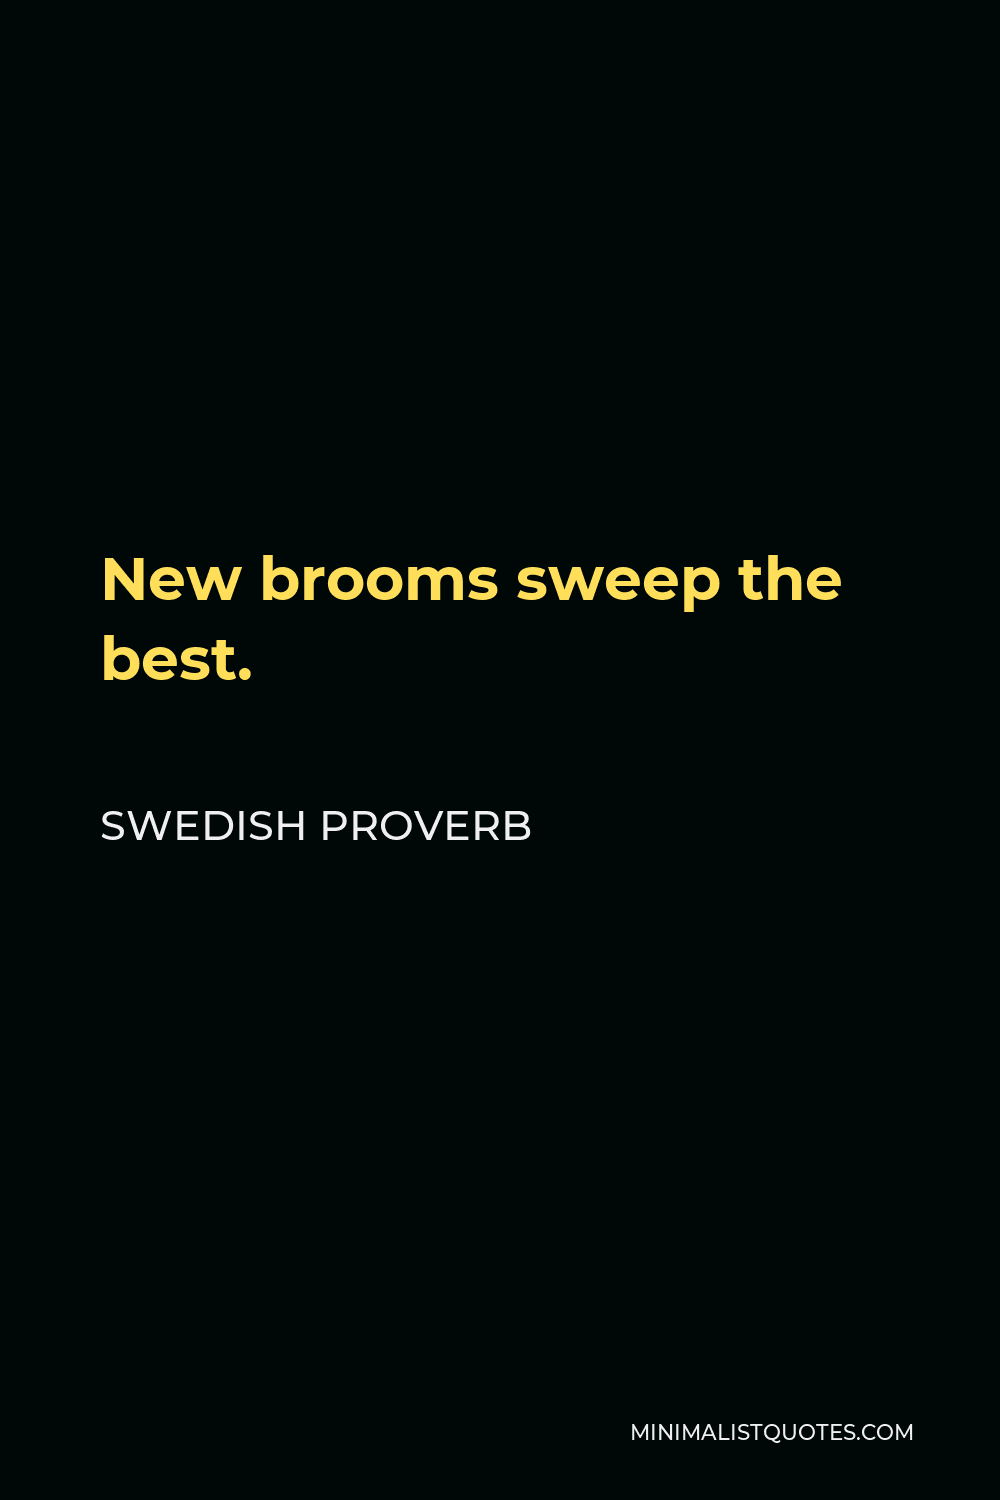 Swedish Proverb Quote - New brooms sweep the best.